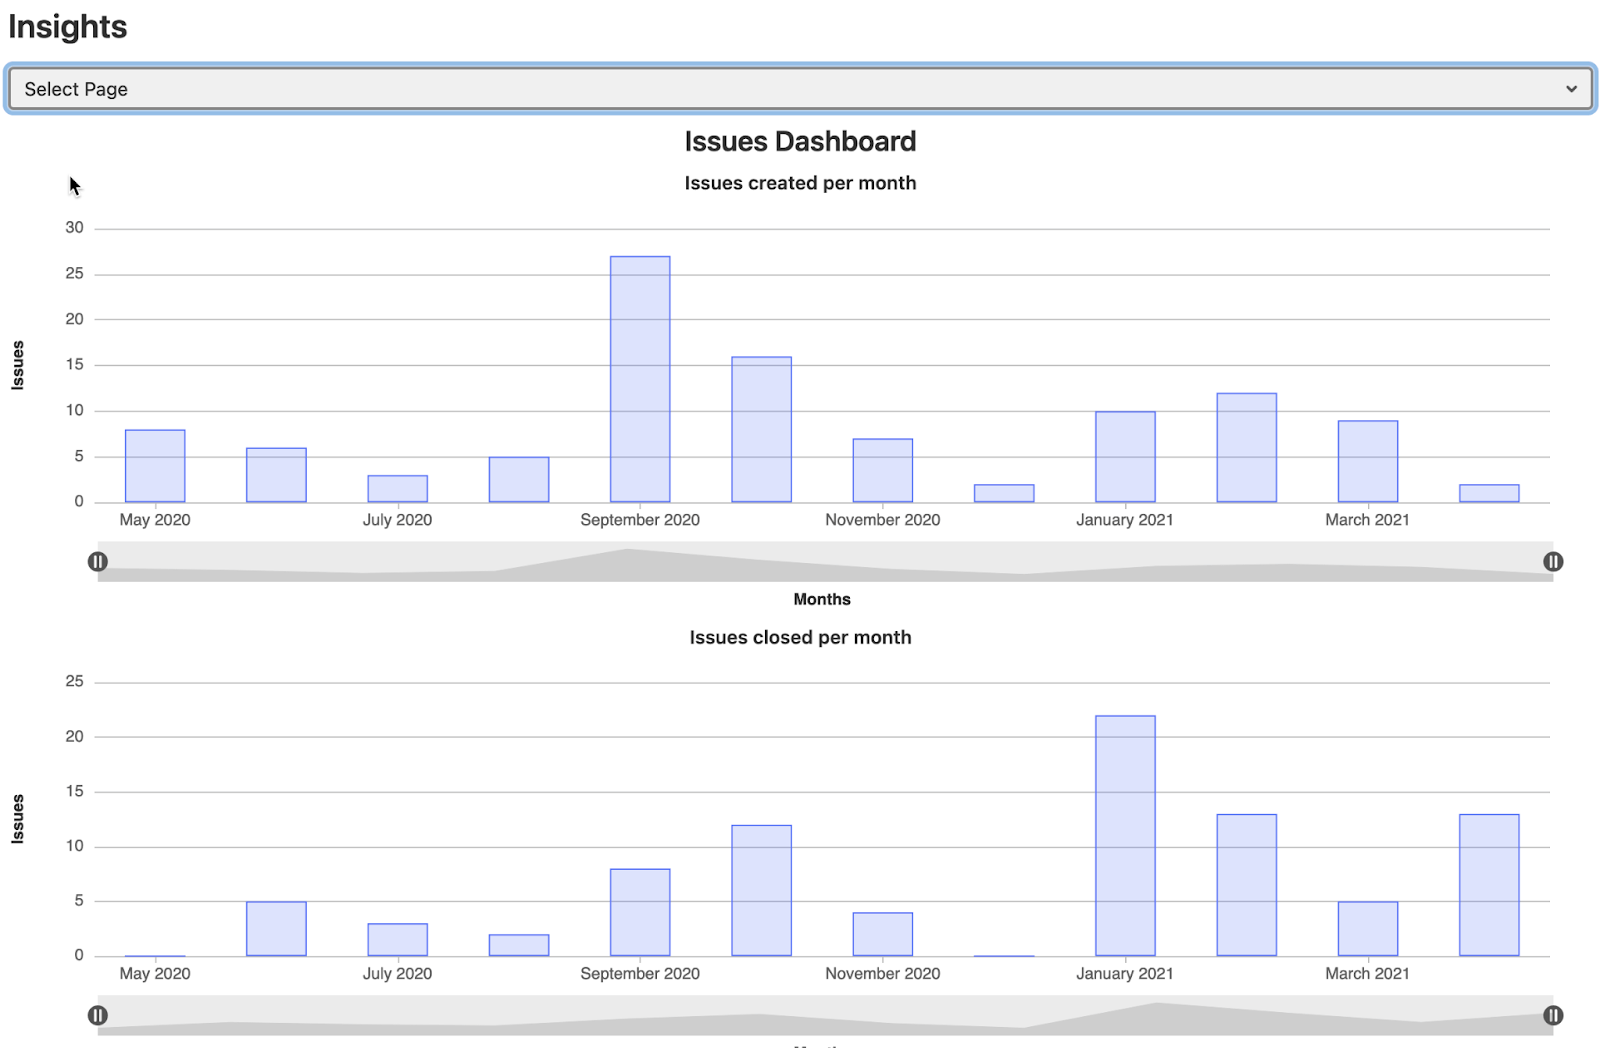 The insights dashboard shows how many issues were opened and closed